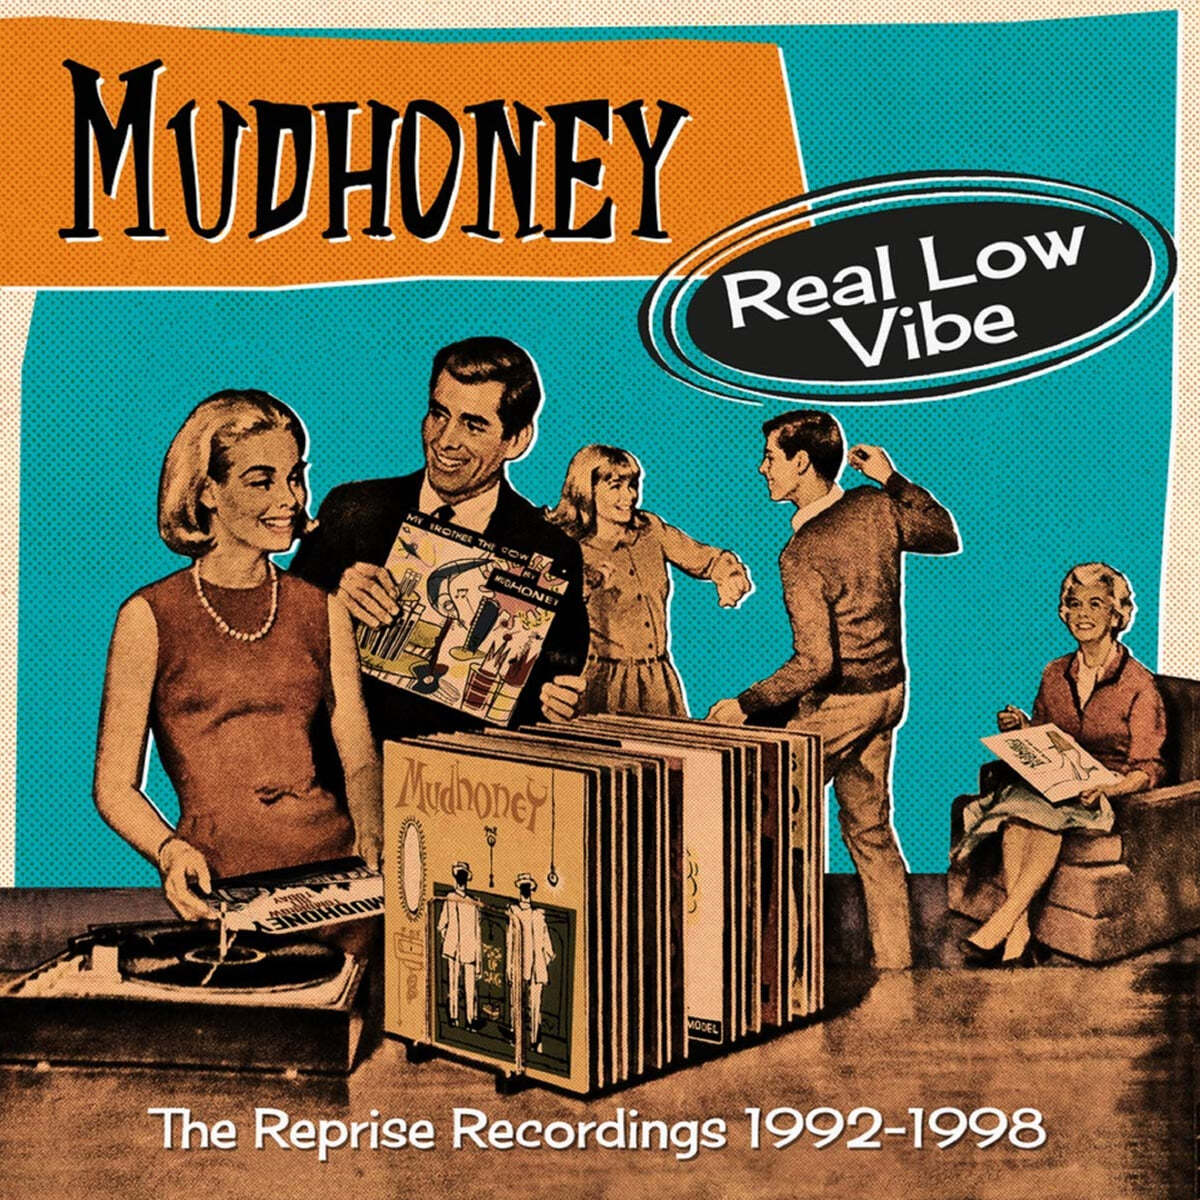 Mudhoney (머드허니) - Real Low Vibe (The Complete Reprise Recordings 1992-1998) 